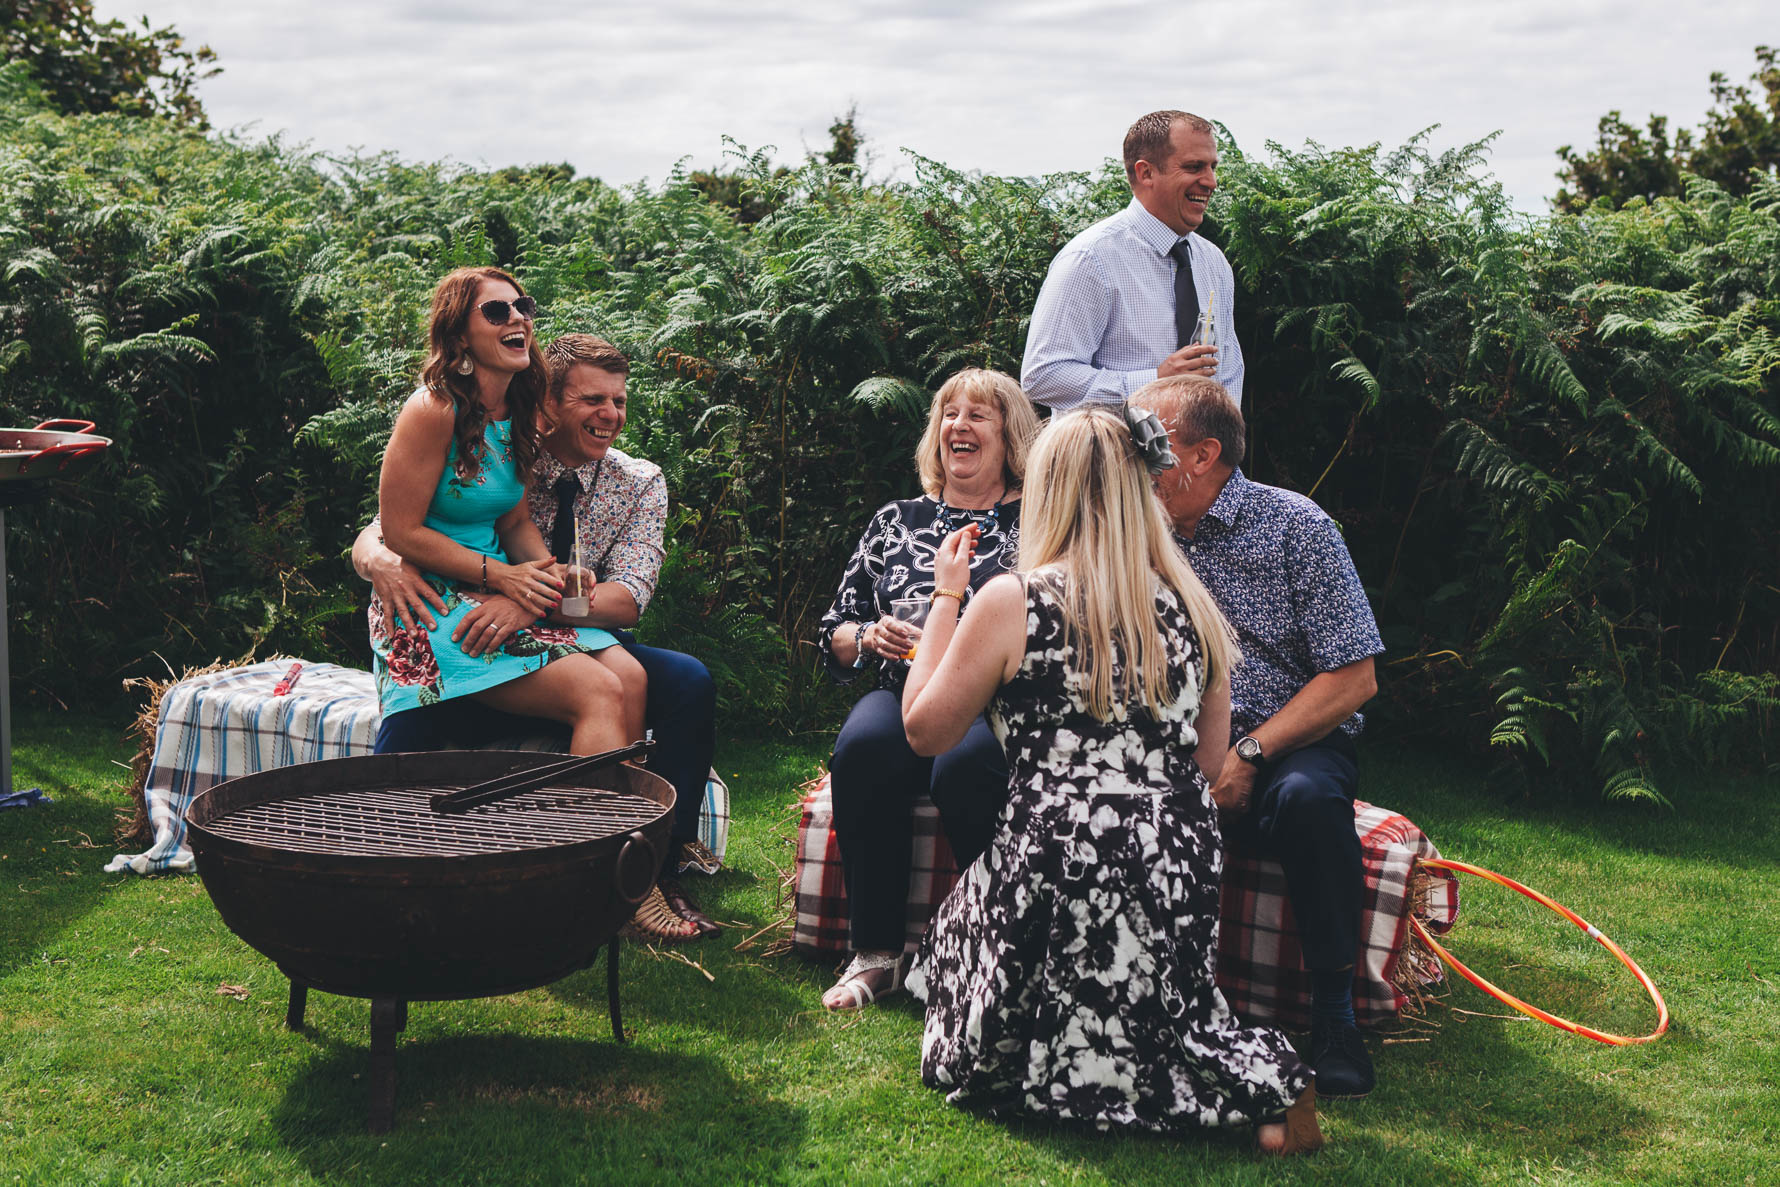 Wedding guests sat on bails of hay in front of an unlit metal barbeque. All of the guests are laughing